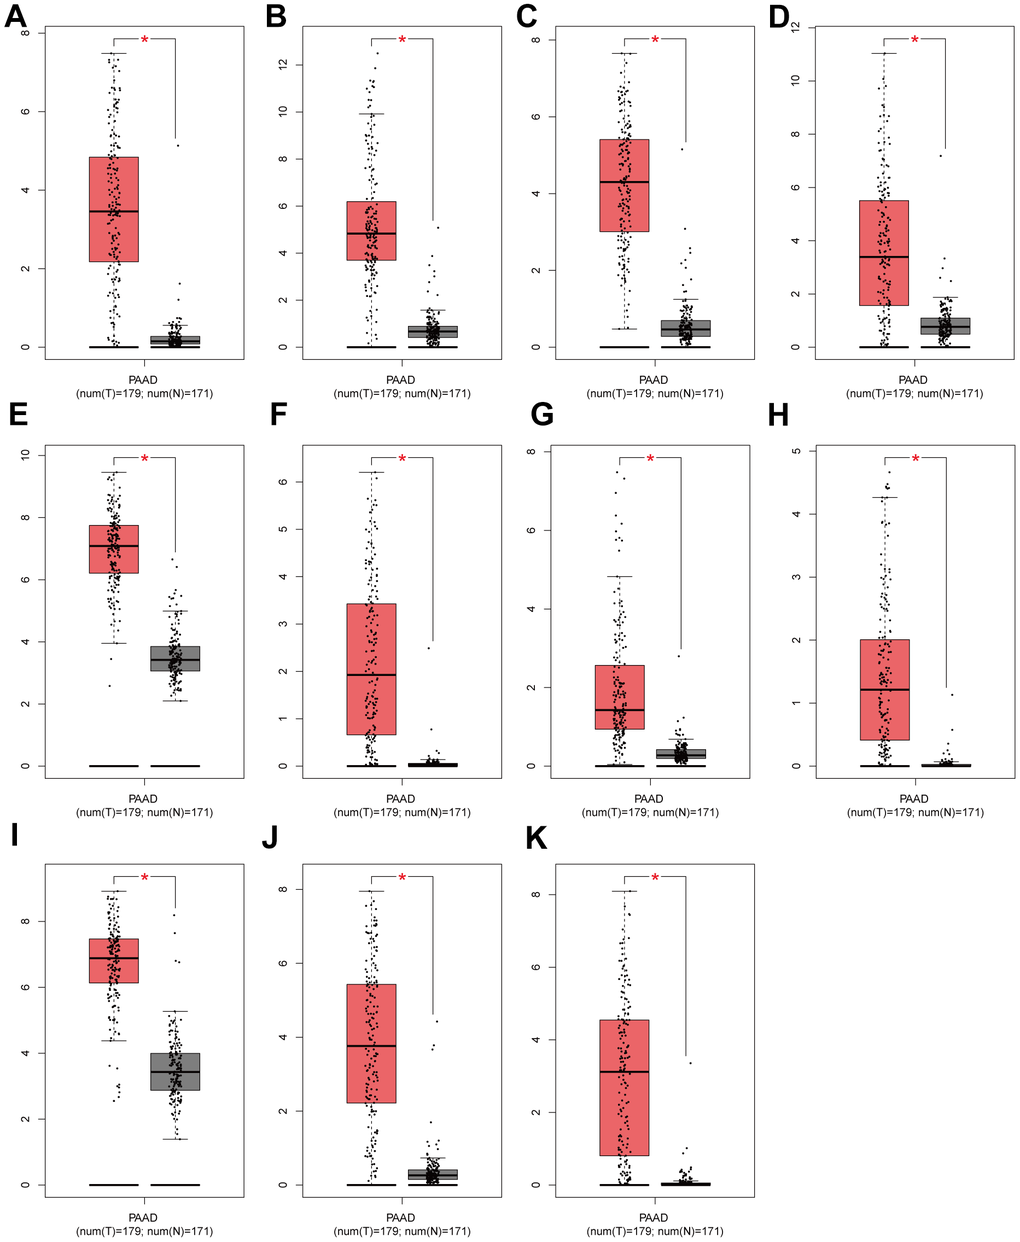 Validation of expression levels of individual core genes in normal pancreas and PAAD tissues from the GEPIA database (A–K) DKK1, S100A2, CDA, KRT6A, ITGA3, GPR87, IL20RB, ZBED2, PMEPA1, CST6 and MUC16 were significantly up-regulated in PAAD when compared to normal tissues (P 